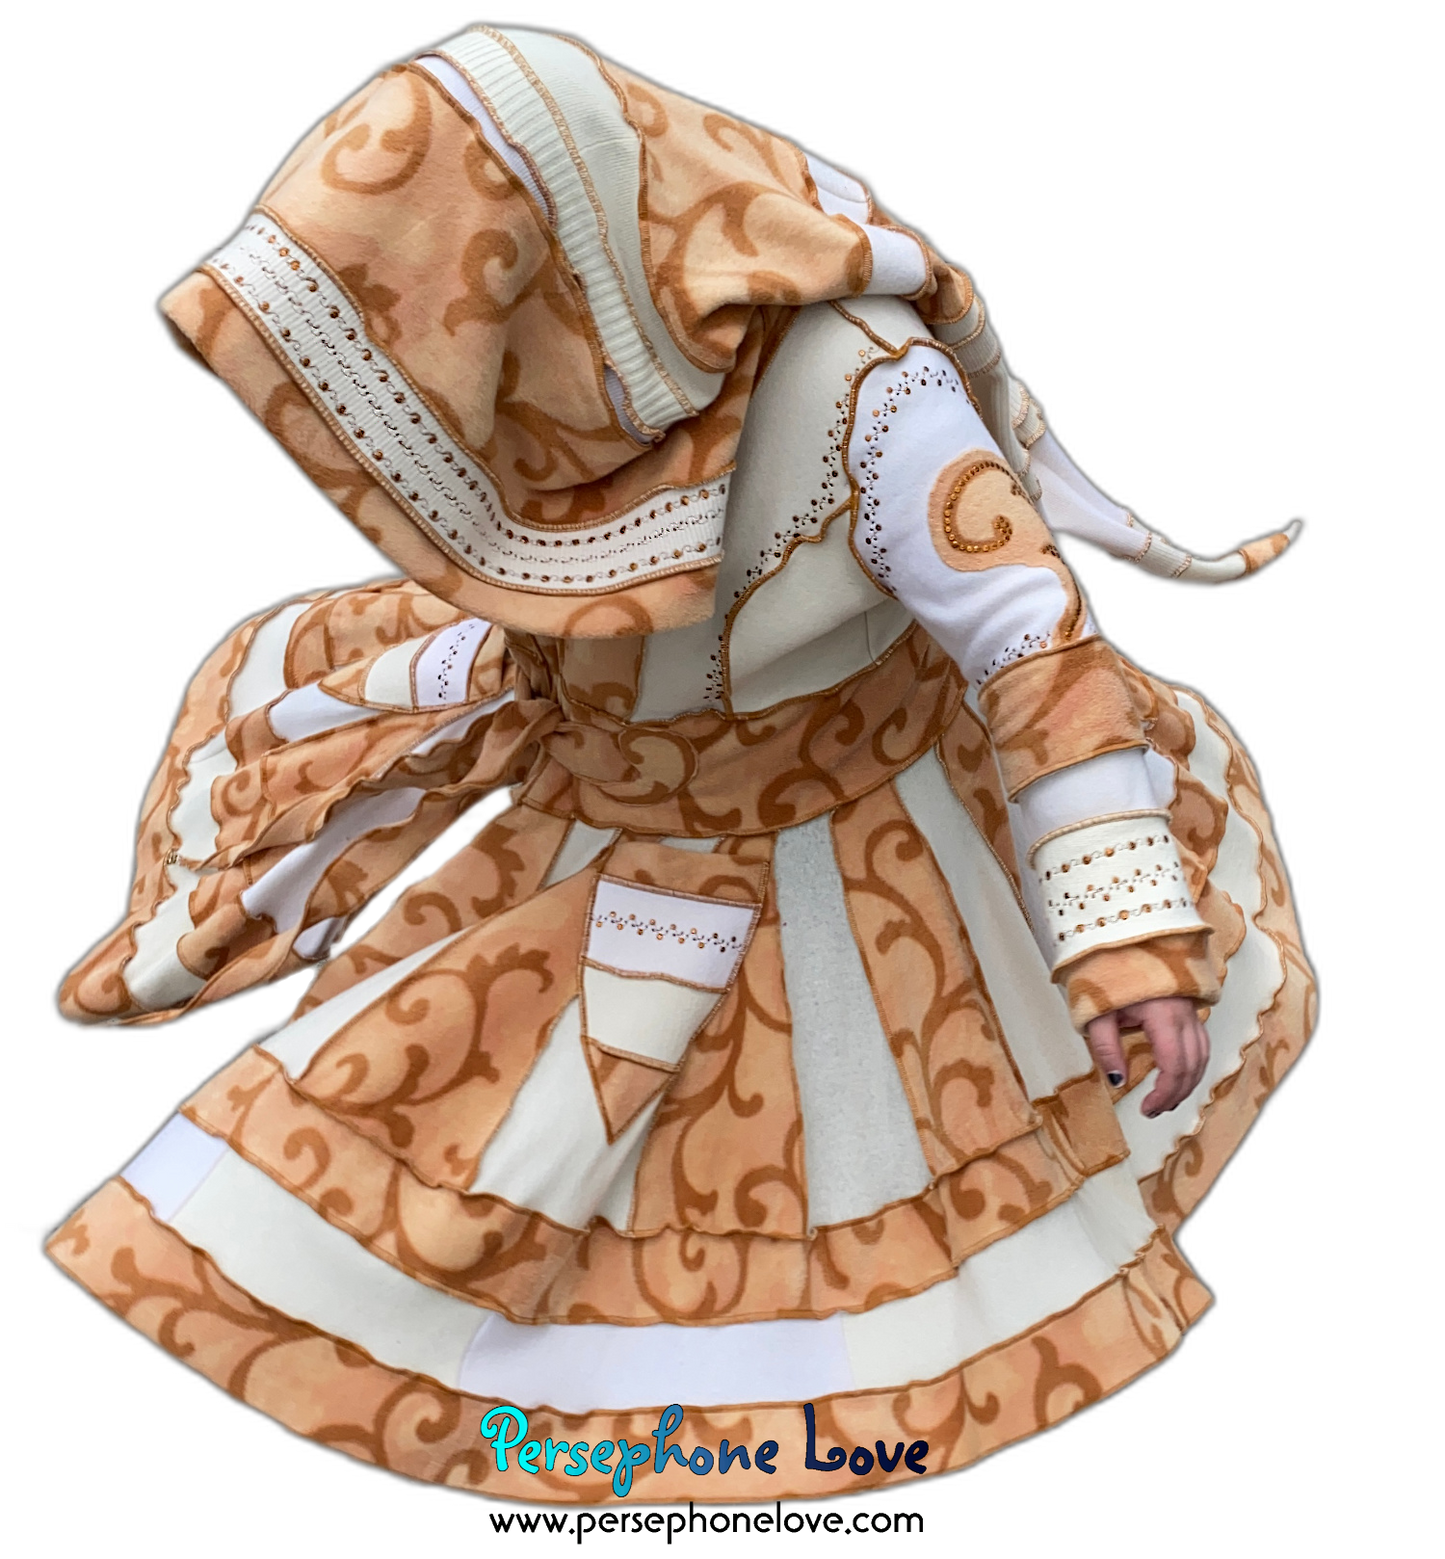 "Loyal" GODDESS SIZE White/Tan embroidered/felted/sequins cashmere patchwork Katwise-inspired sweatercoat-2534